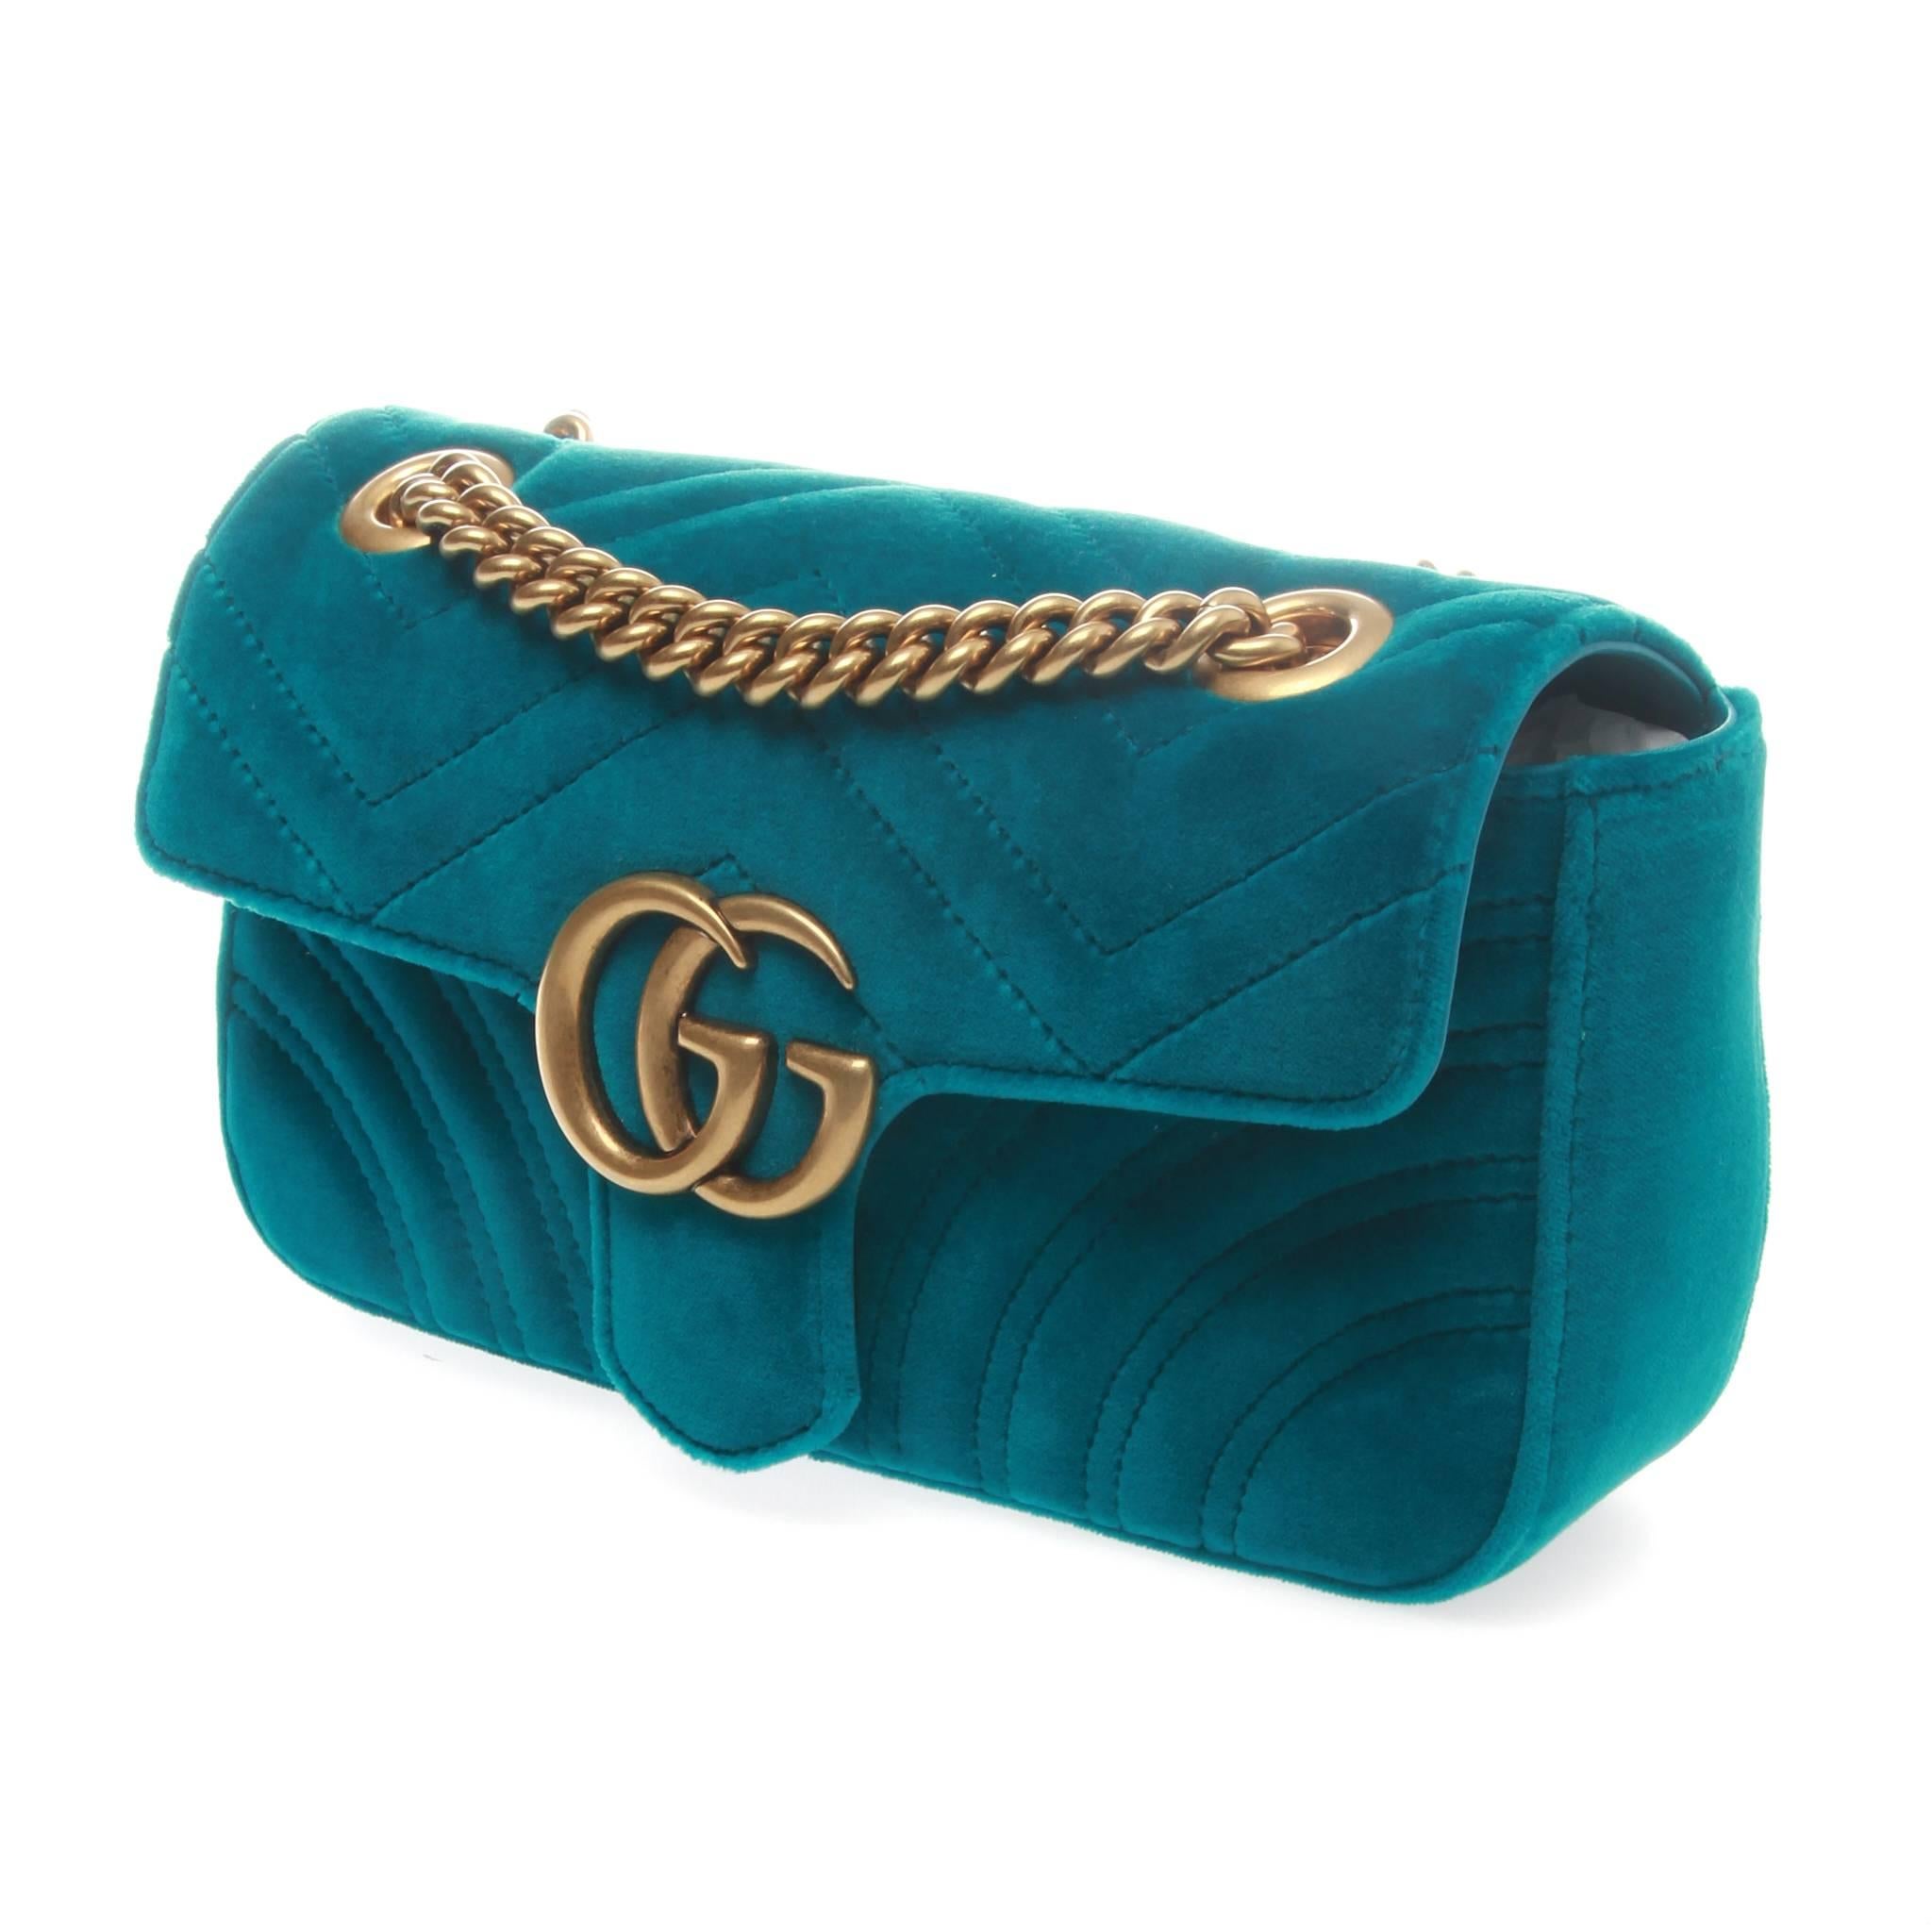 Gucci GG Marmont Velvet Shoulder Bag

The small GG Marmont chain shoulder bag has a softly structured shape and an oversized flap closure with Double G hardware.The sliding chain strap can be worn multiple ways, changing between a shoulder and a top